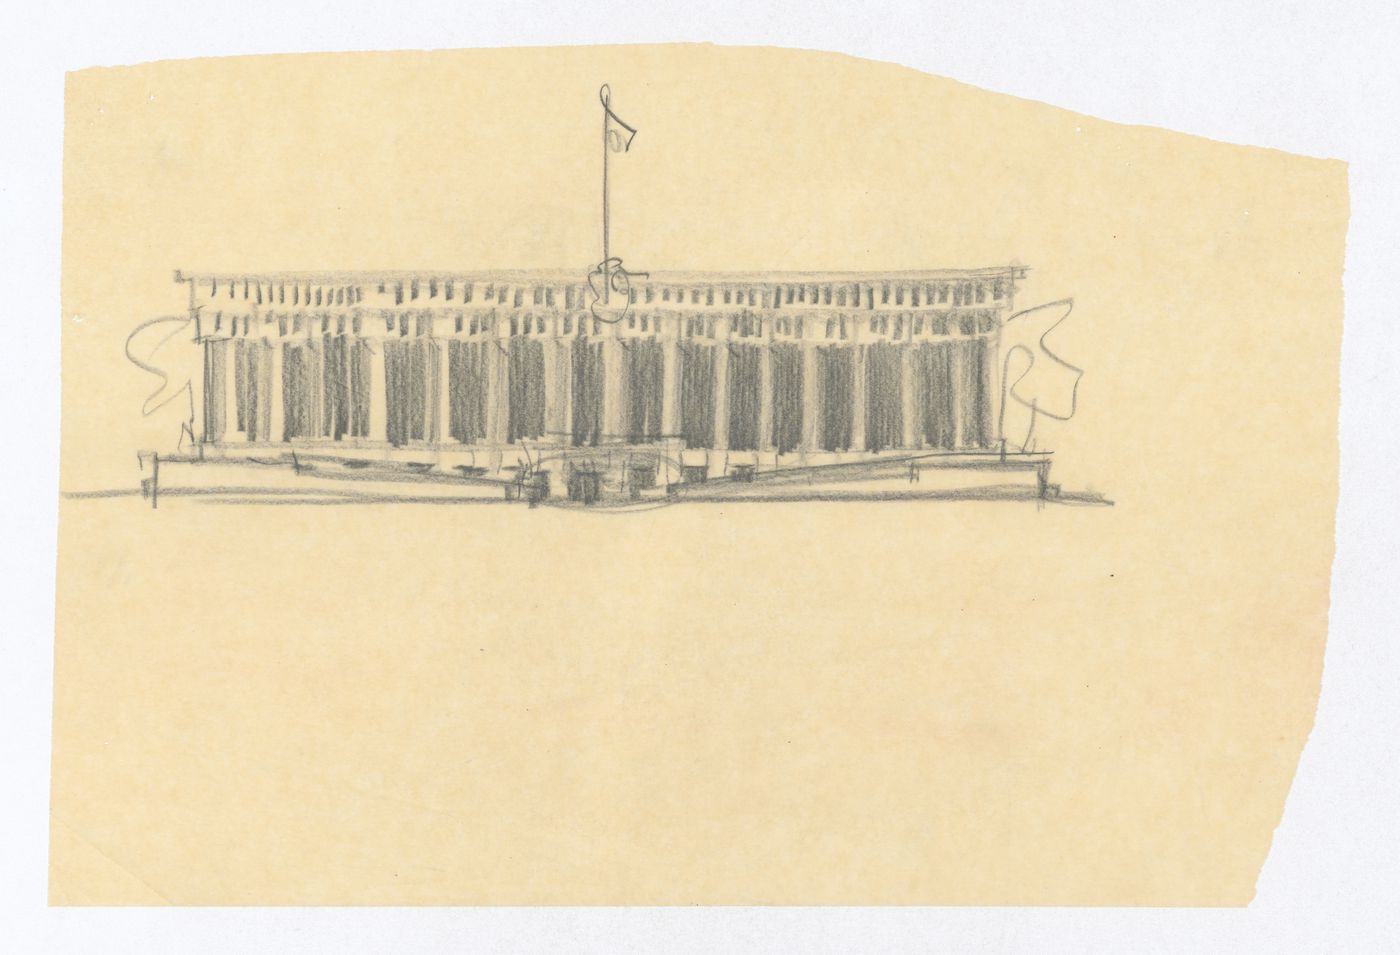 Sketch elevation, United States Chancellery Building, London, England